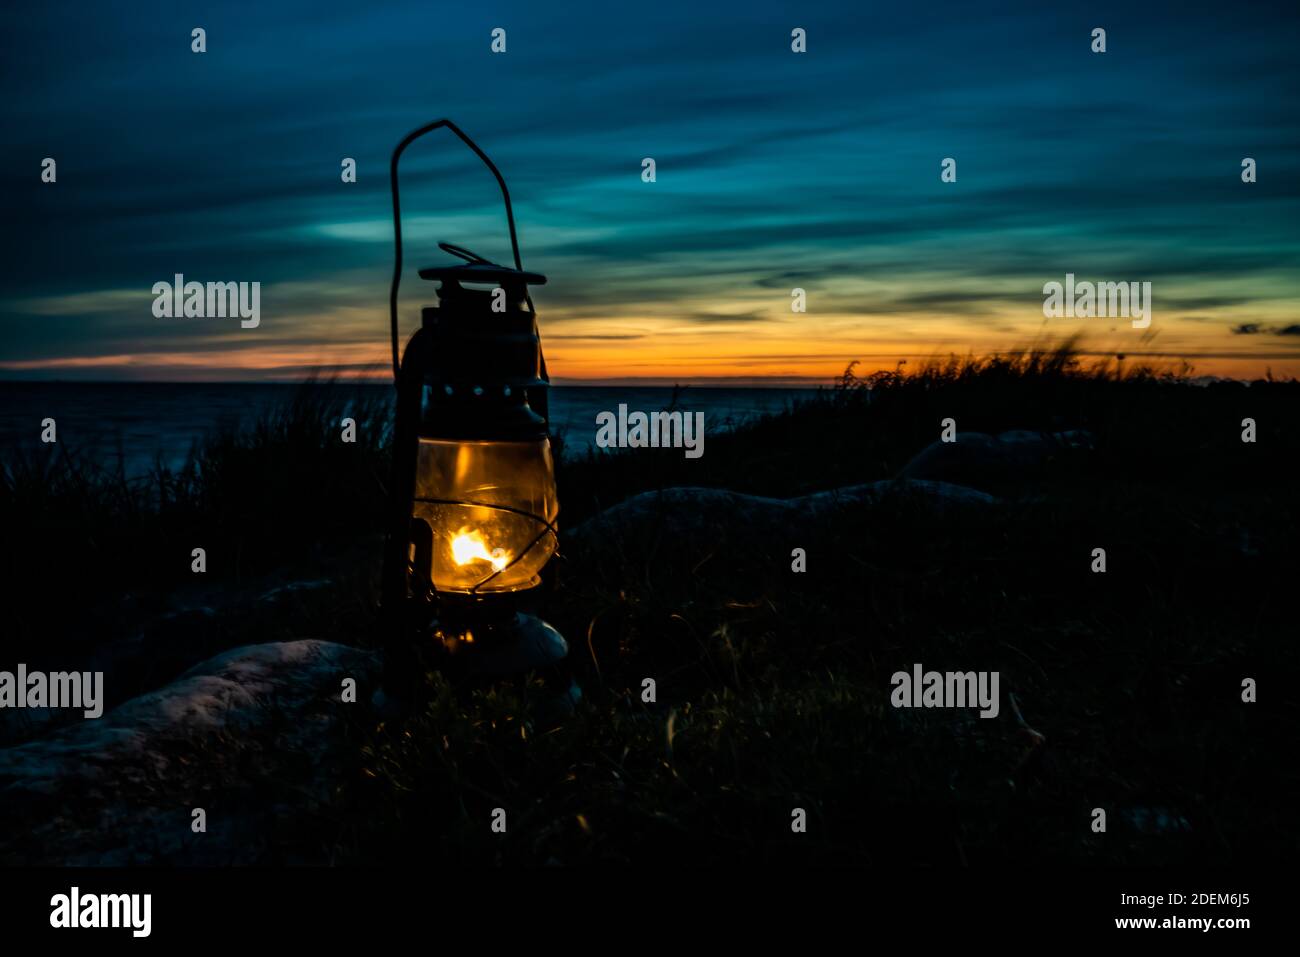 Old classic oil lantern burning with an orange flame by the ocean at dusk. . High quality photo Stock Photo